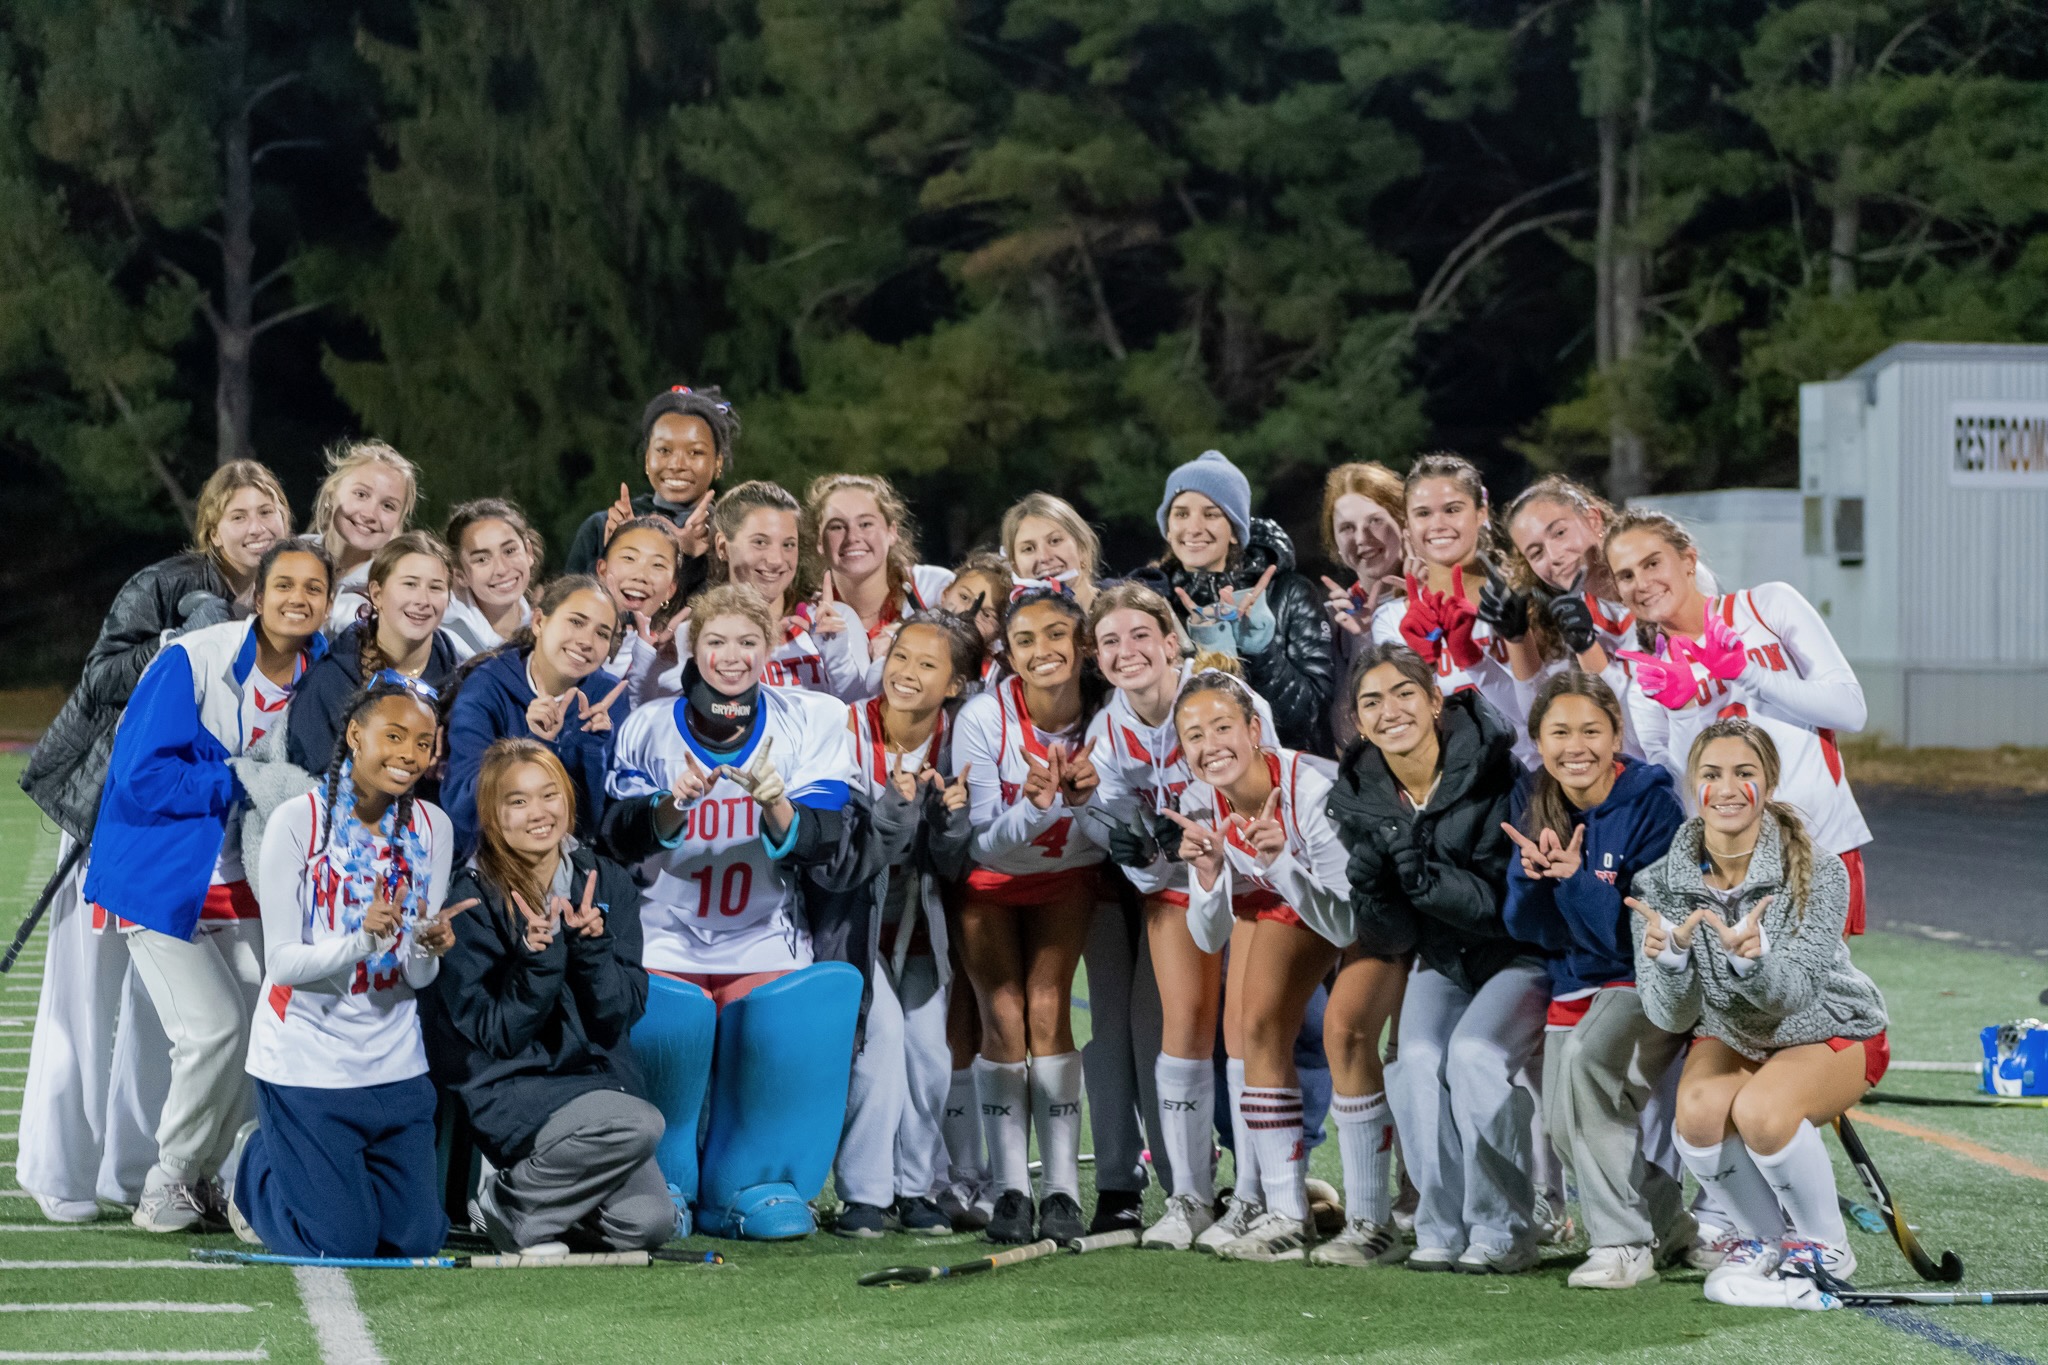 On Nov. 3, varsity field hockey beat Dulaney High School 2-1 in the first round of the state playoffs.